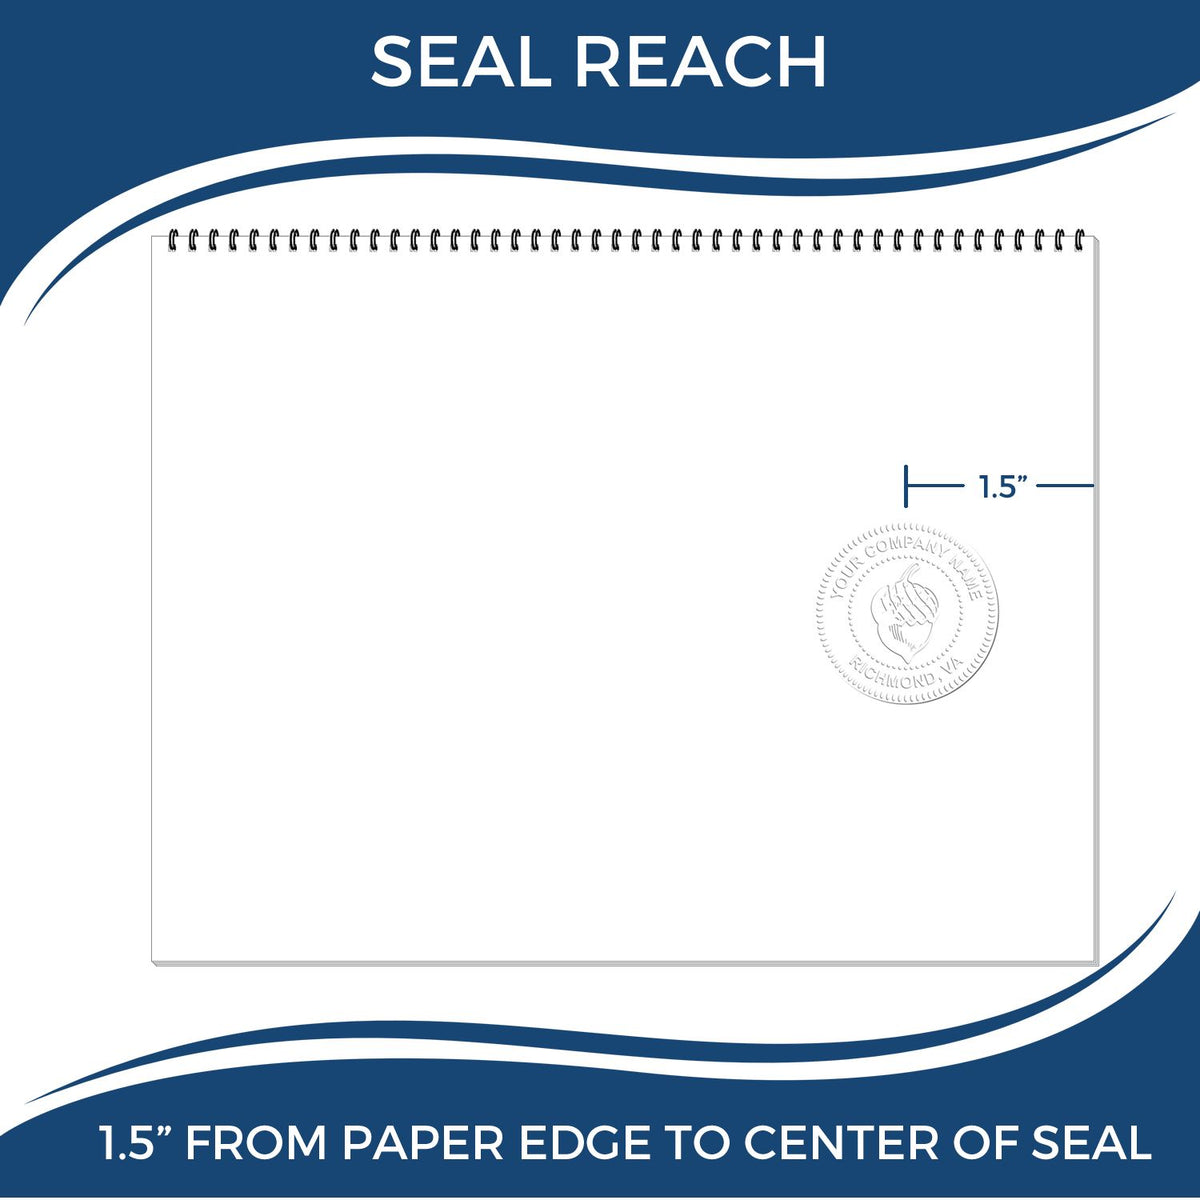 An infographic showing the seal reach which is represented by a ruler and a miniature seal image of the Gift New York Engineer Seal